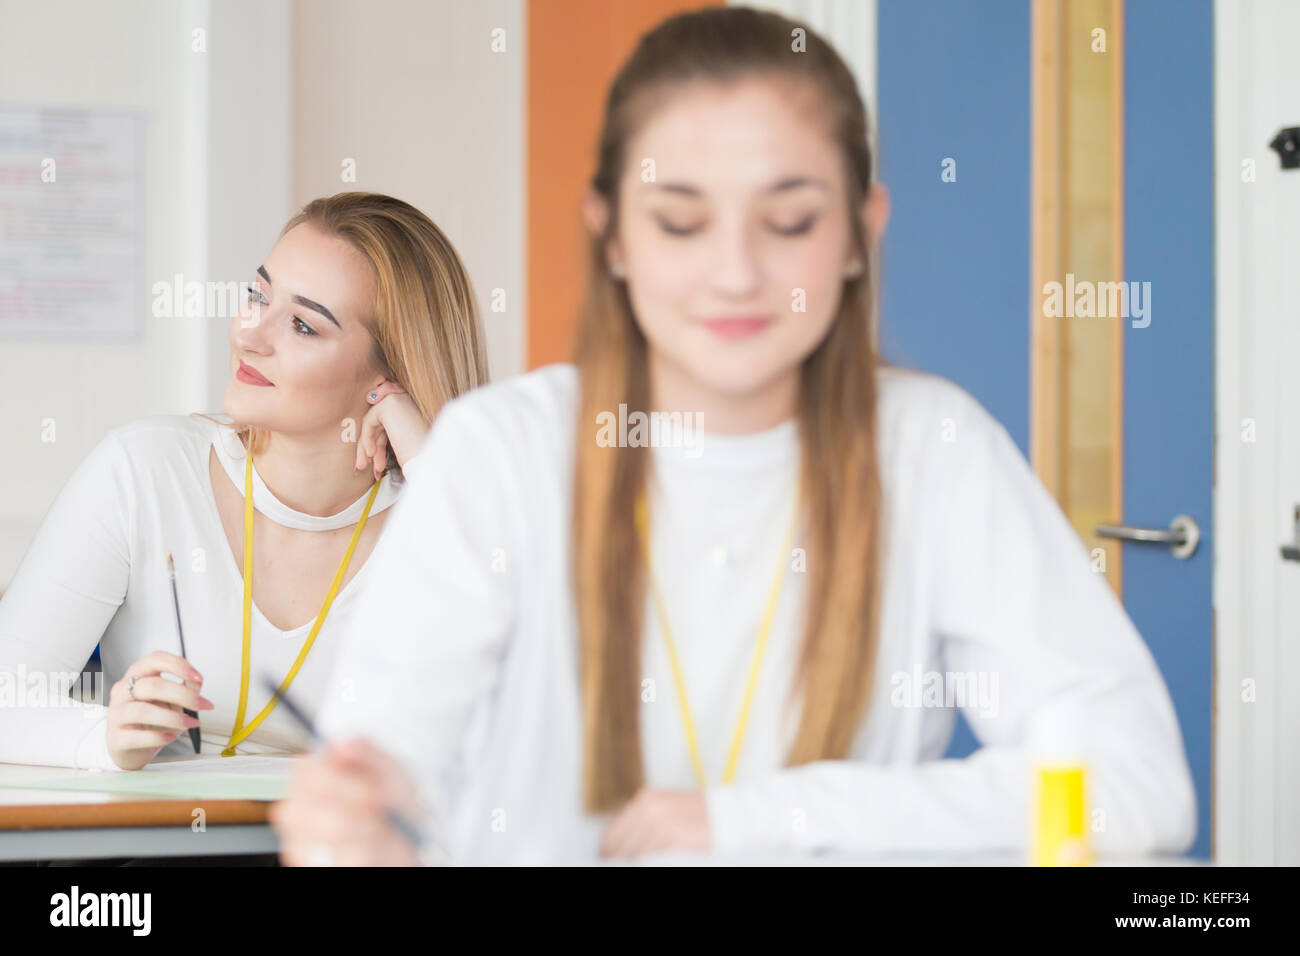 Pretty sixth form student being attentive and enjoying her school lesson UK Stock Photo